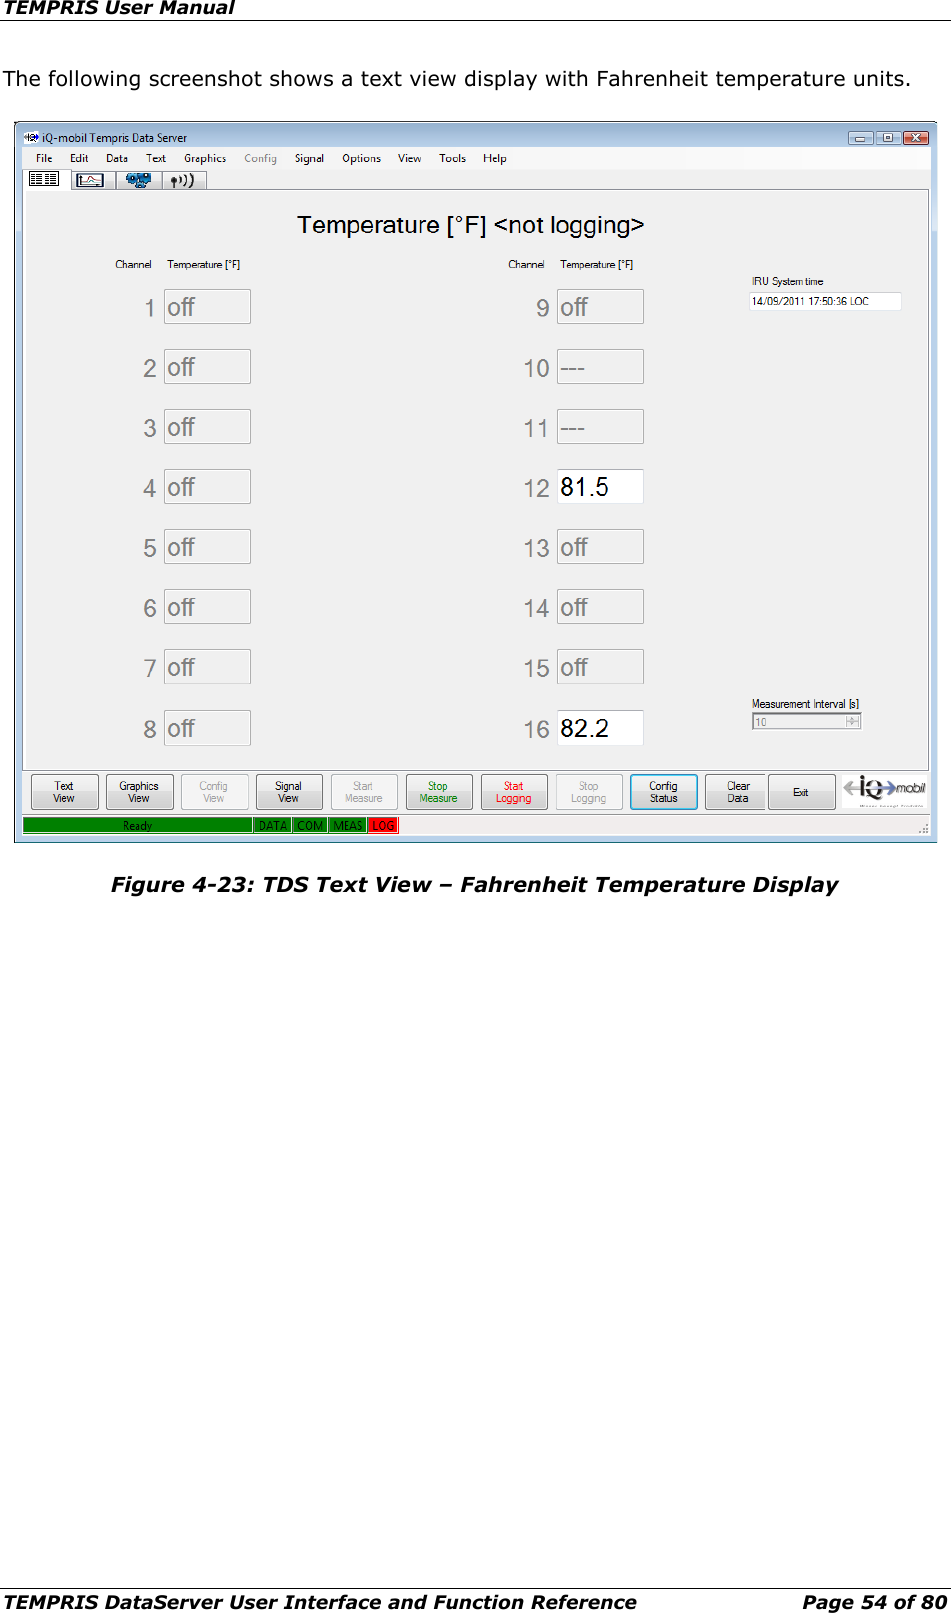 TEMPRIS User Manual TEMPRIS DataServer User Interface and Function Reference Page 54 of 80 The following screenshot shows a text view display with Fahrenheit temperature units.  Figure 4-23: TDS Text View – Fahrenheit Temperature Display     